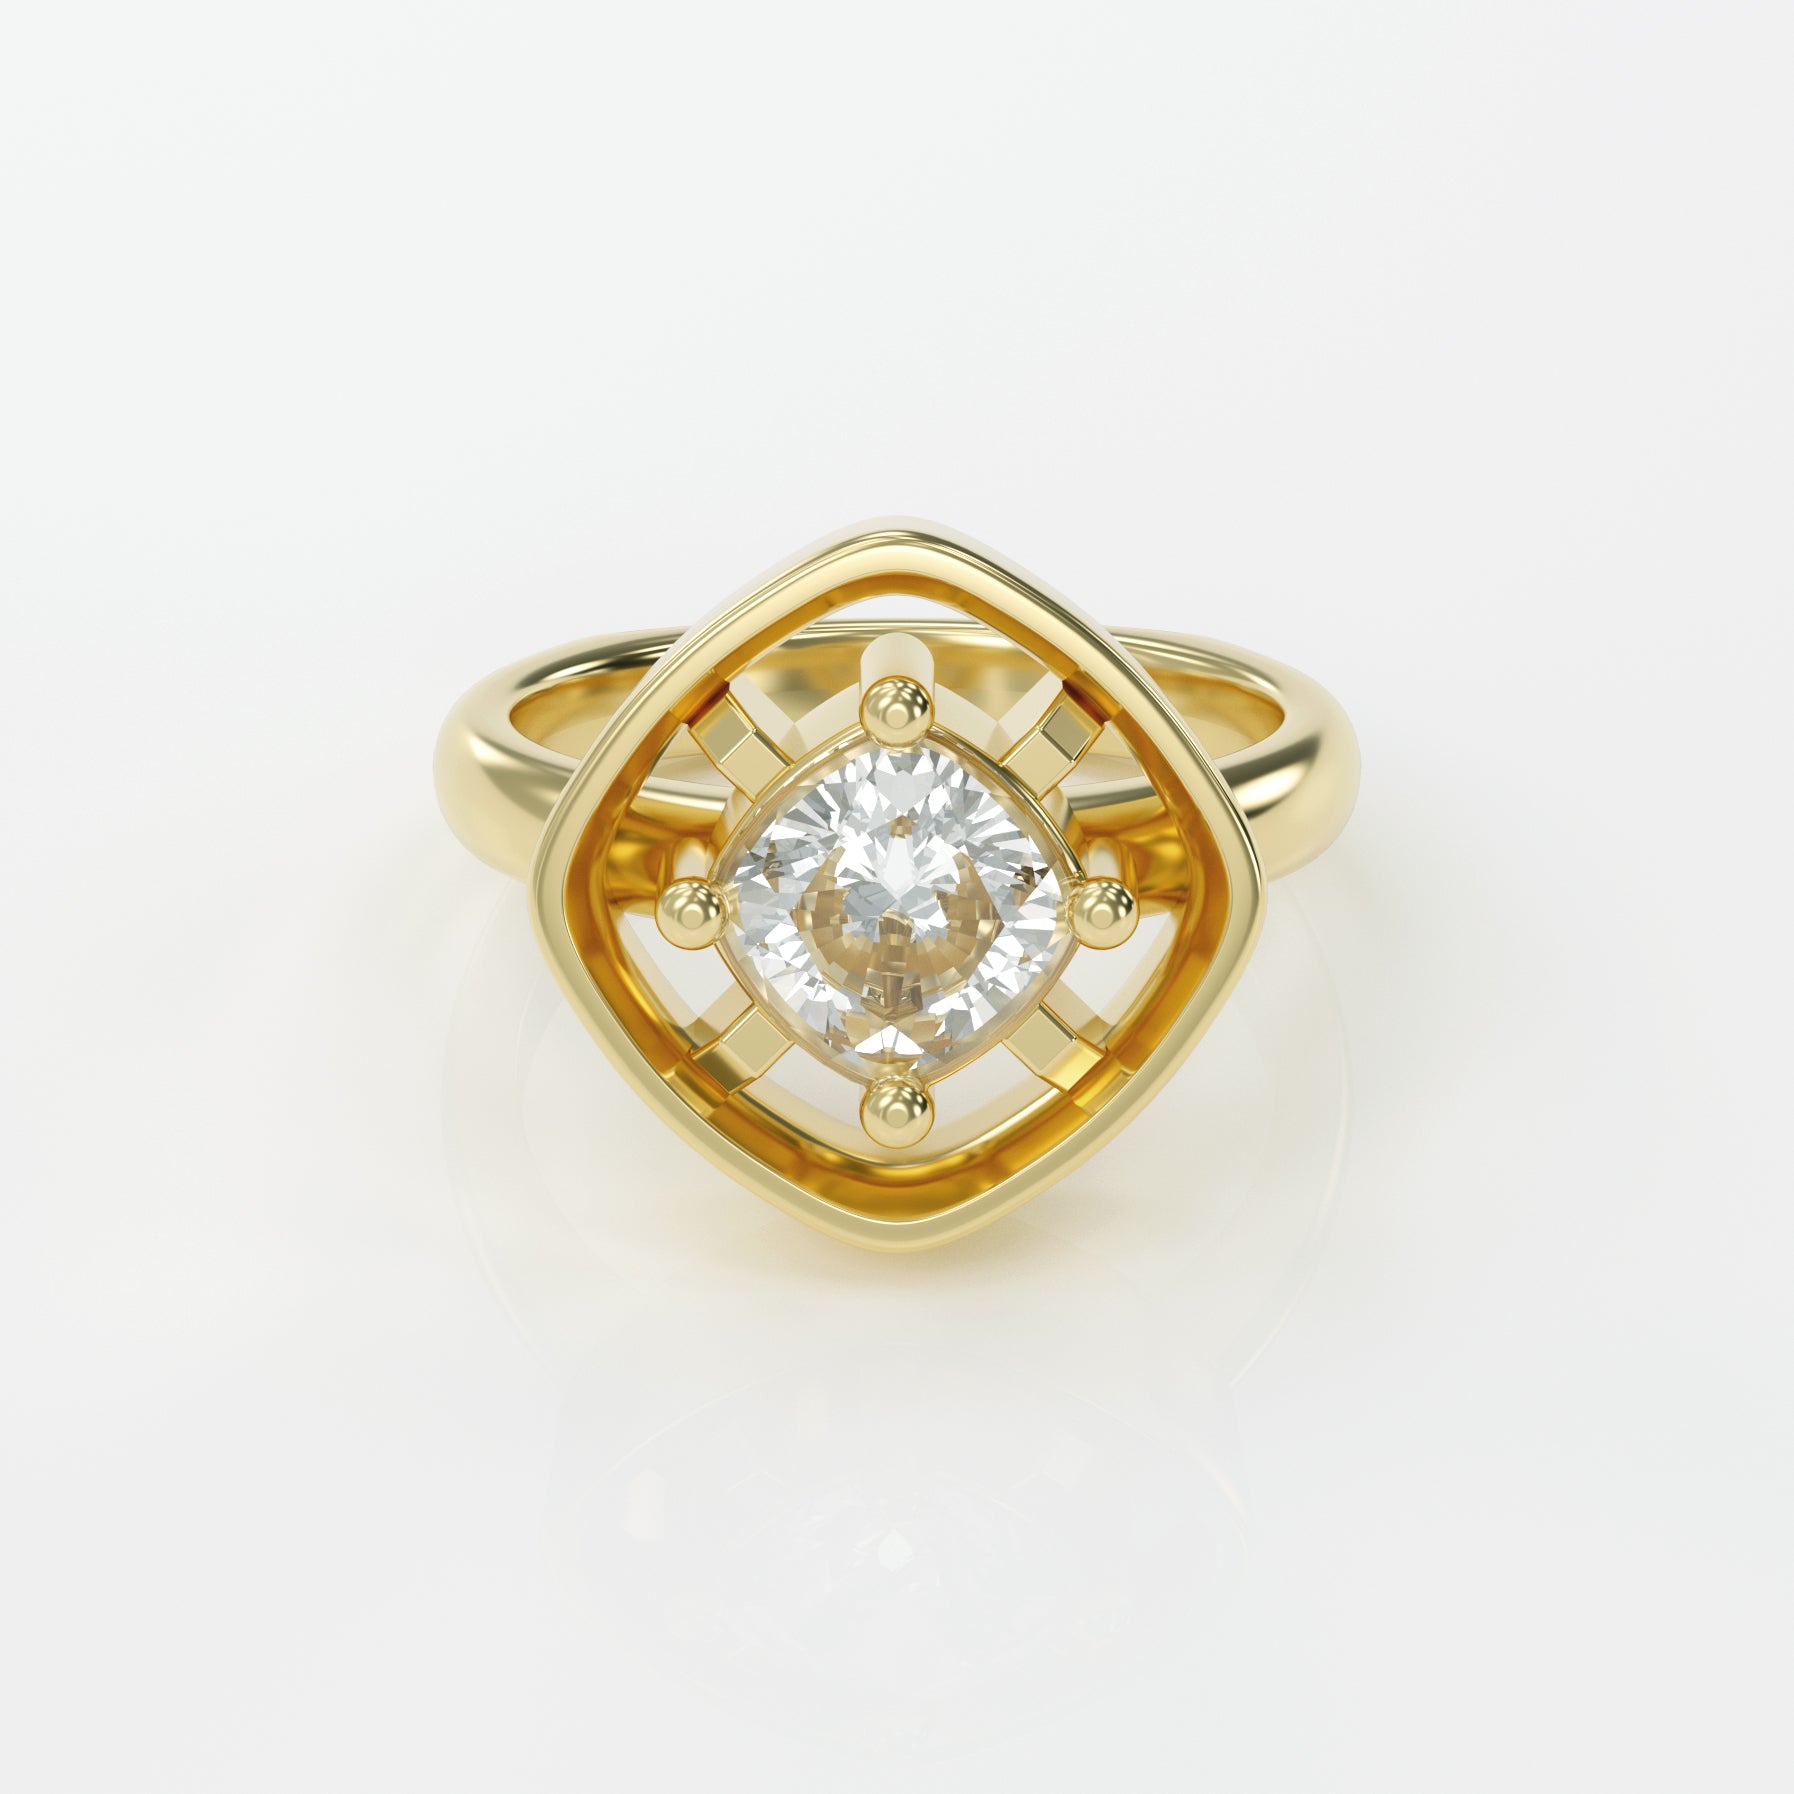 custom project payment #4 - 11/4/22 - 14k gold mounting installment (try at home) CUSHION CUT MIDHEAVEN RING | custom project